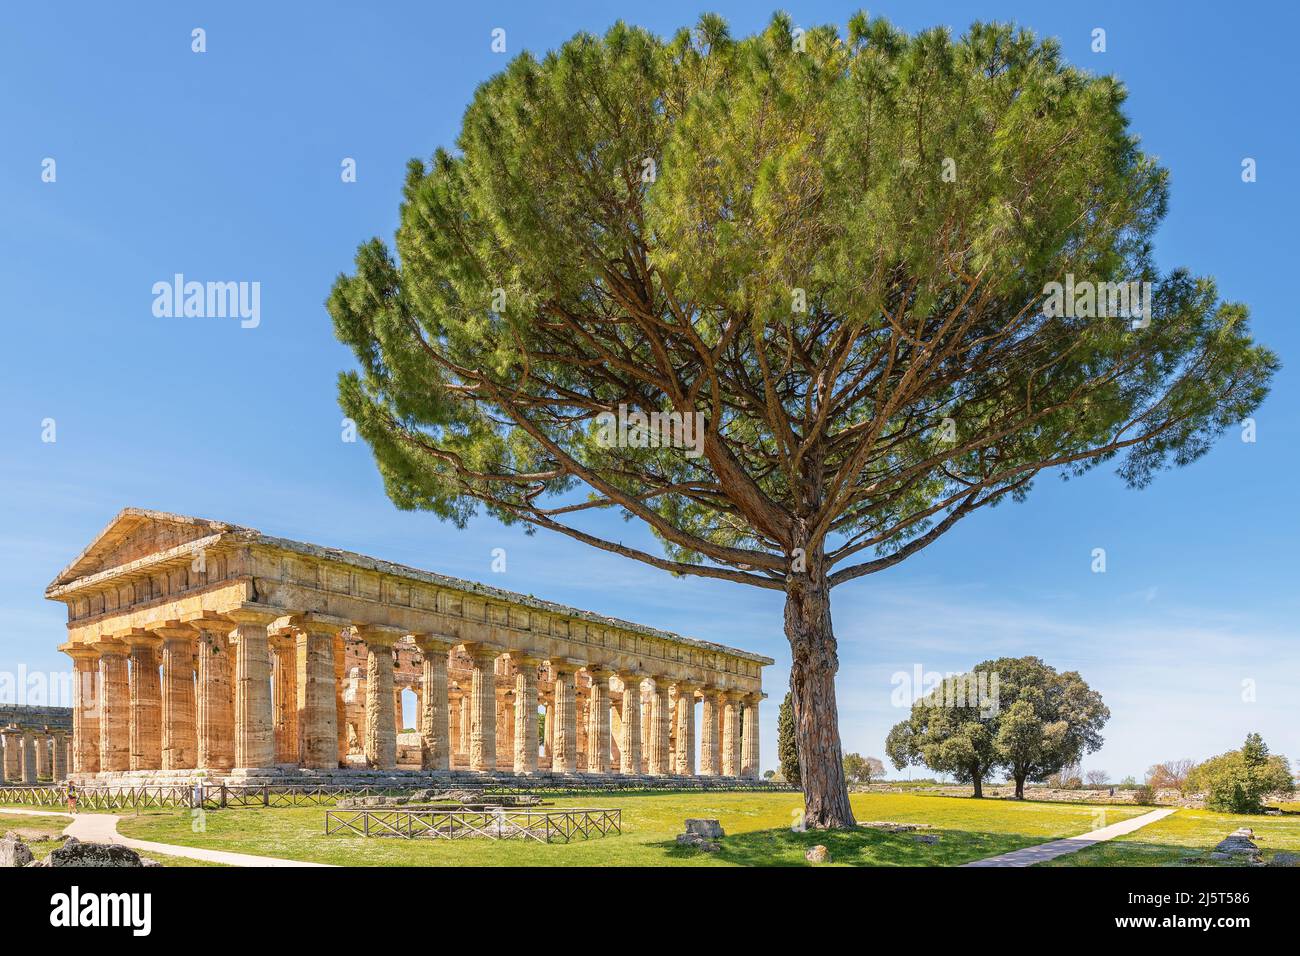 Paestum, Italy; April 18, 2022 - The Temple of Hera at Paestum, which contains some of the most well-preserved ancient Greek temples in the world. Stock Photo